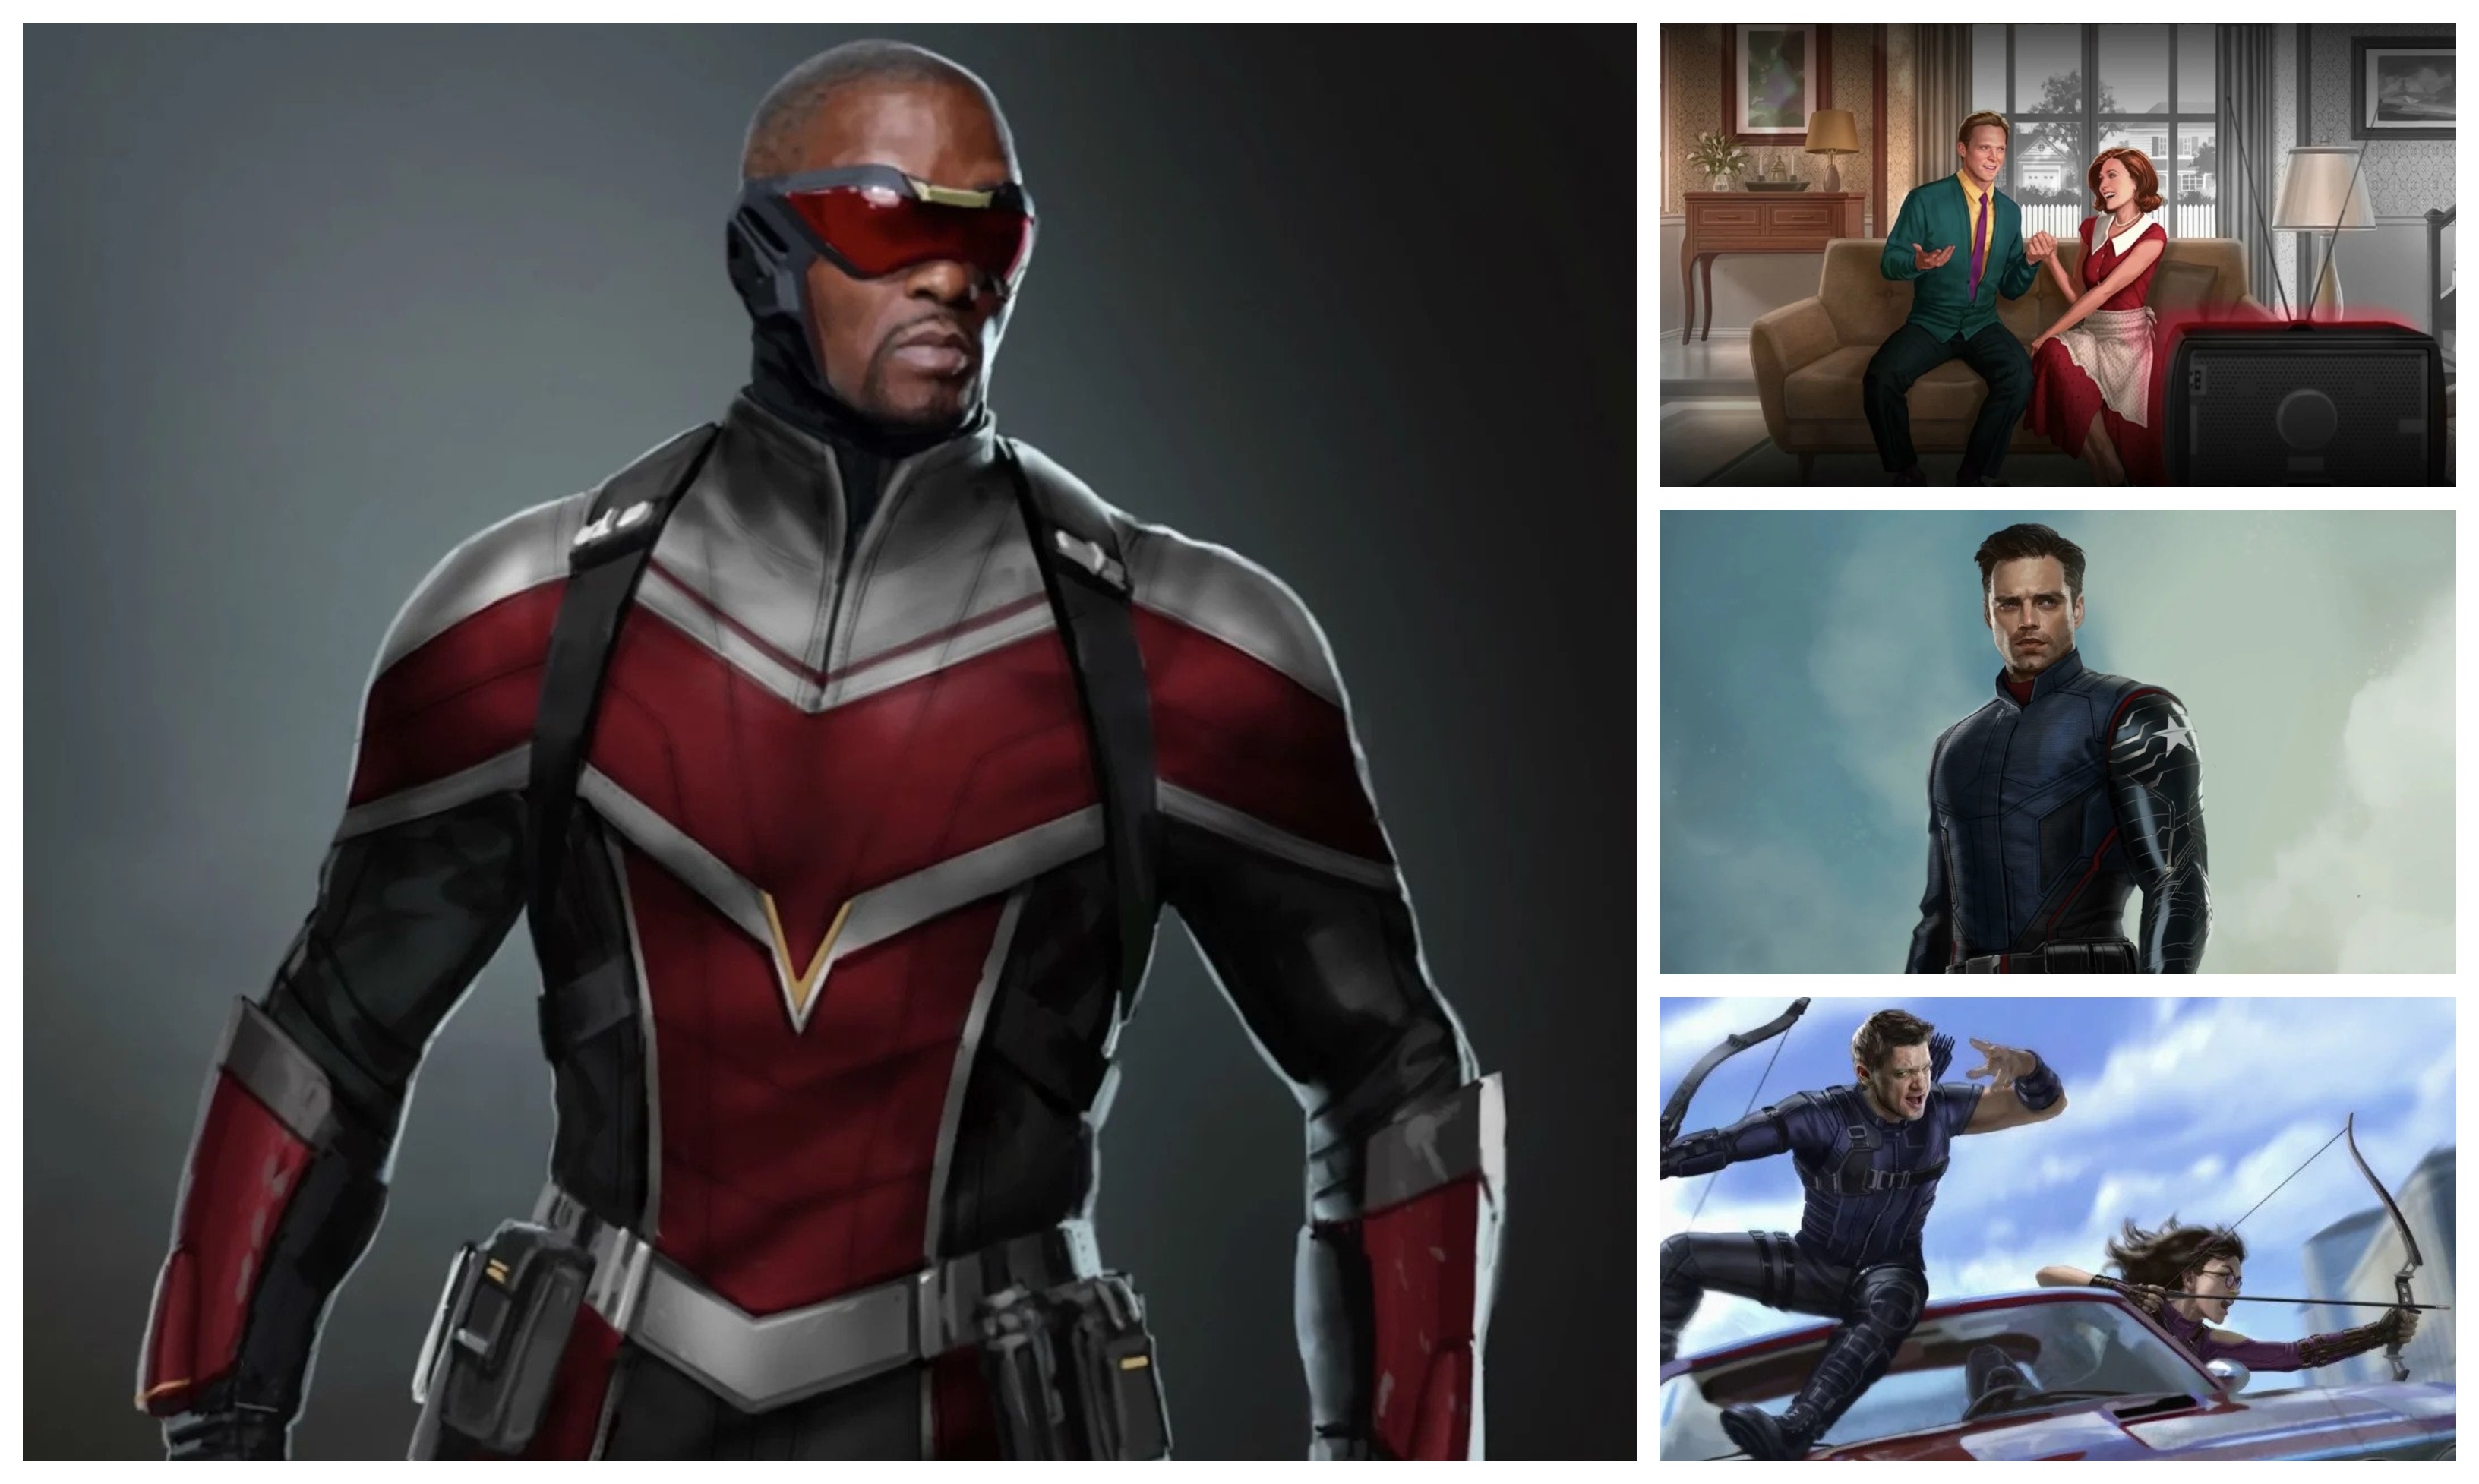 Disney Plus Releases Concept Art Ahead Of New Marvel Shows